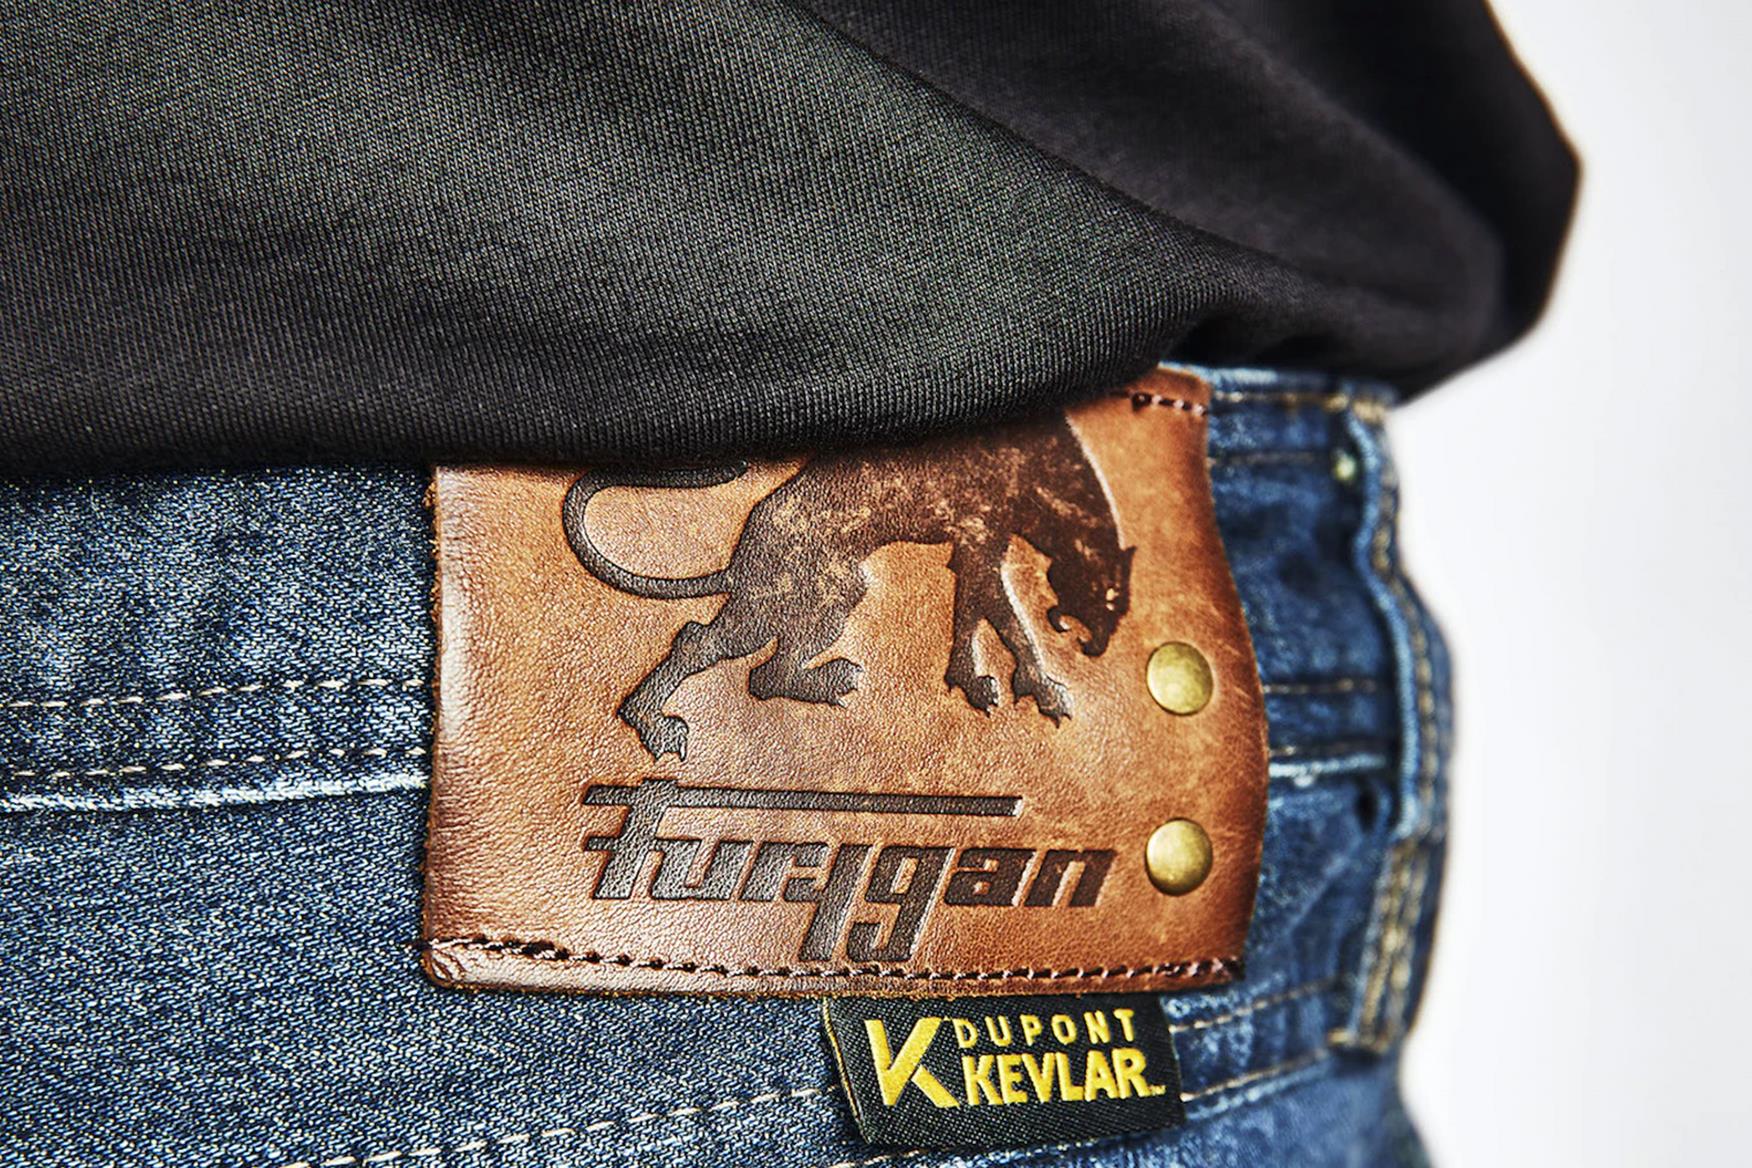 Riding jeans review: Furygan K11 X Kevlar tried and tested